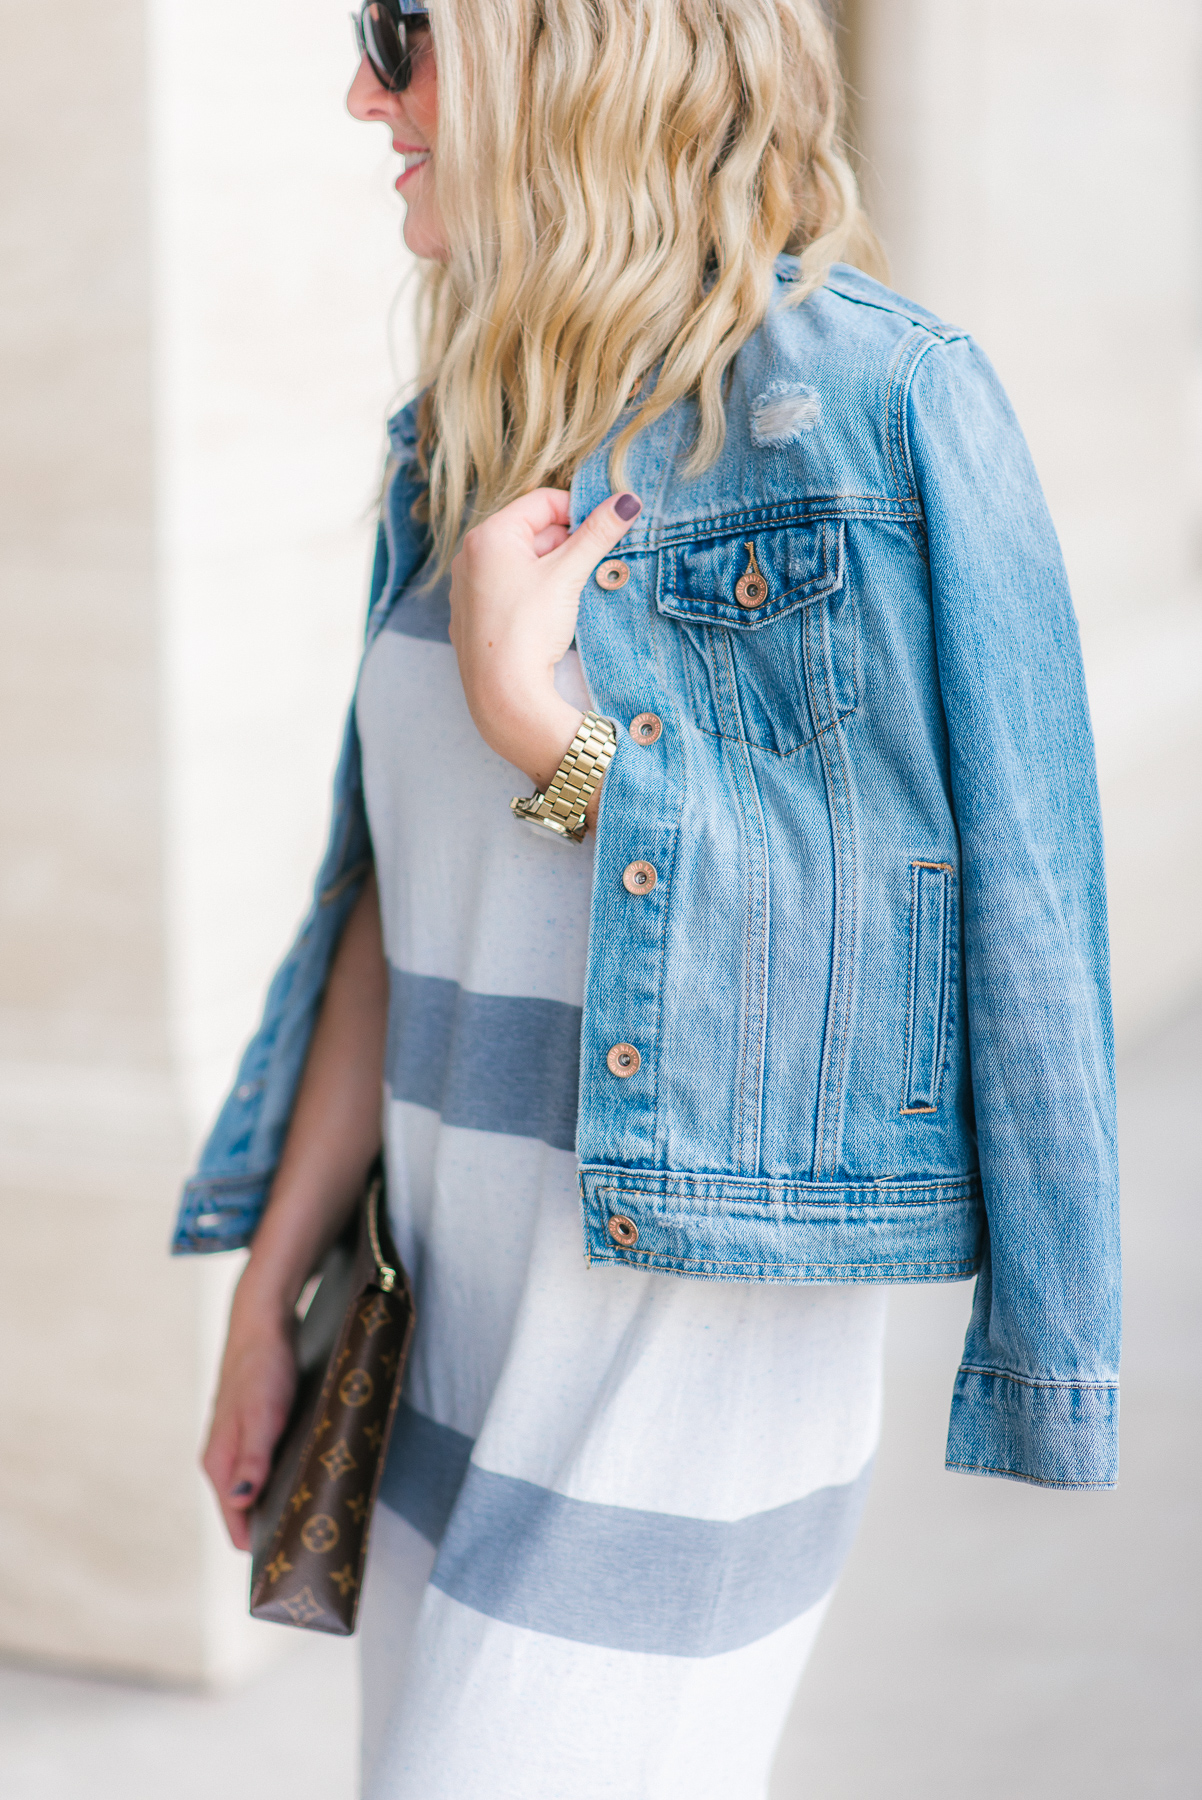 wearing a distressed jean jacket from Old Navy for the fall